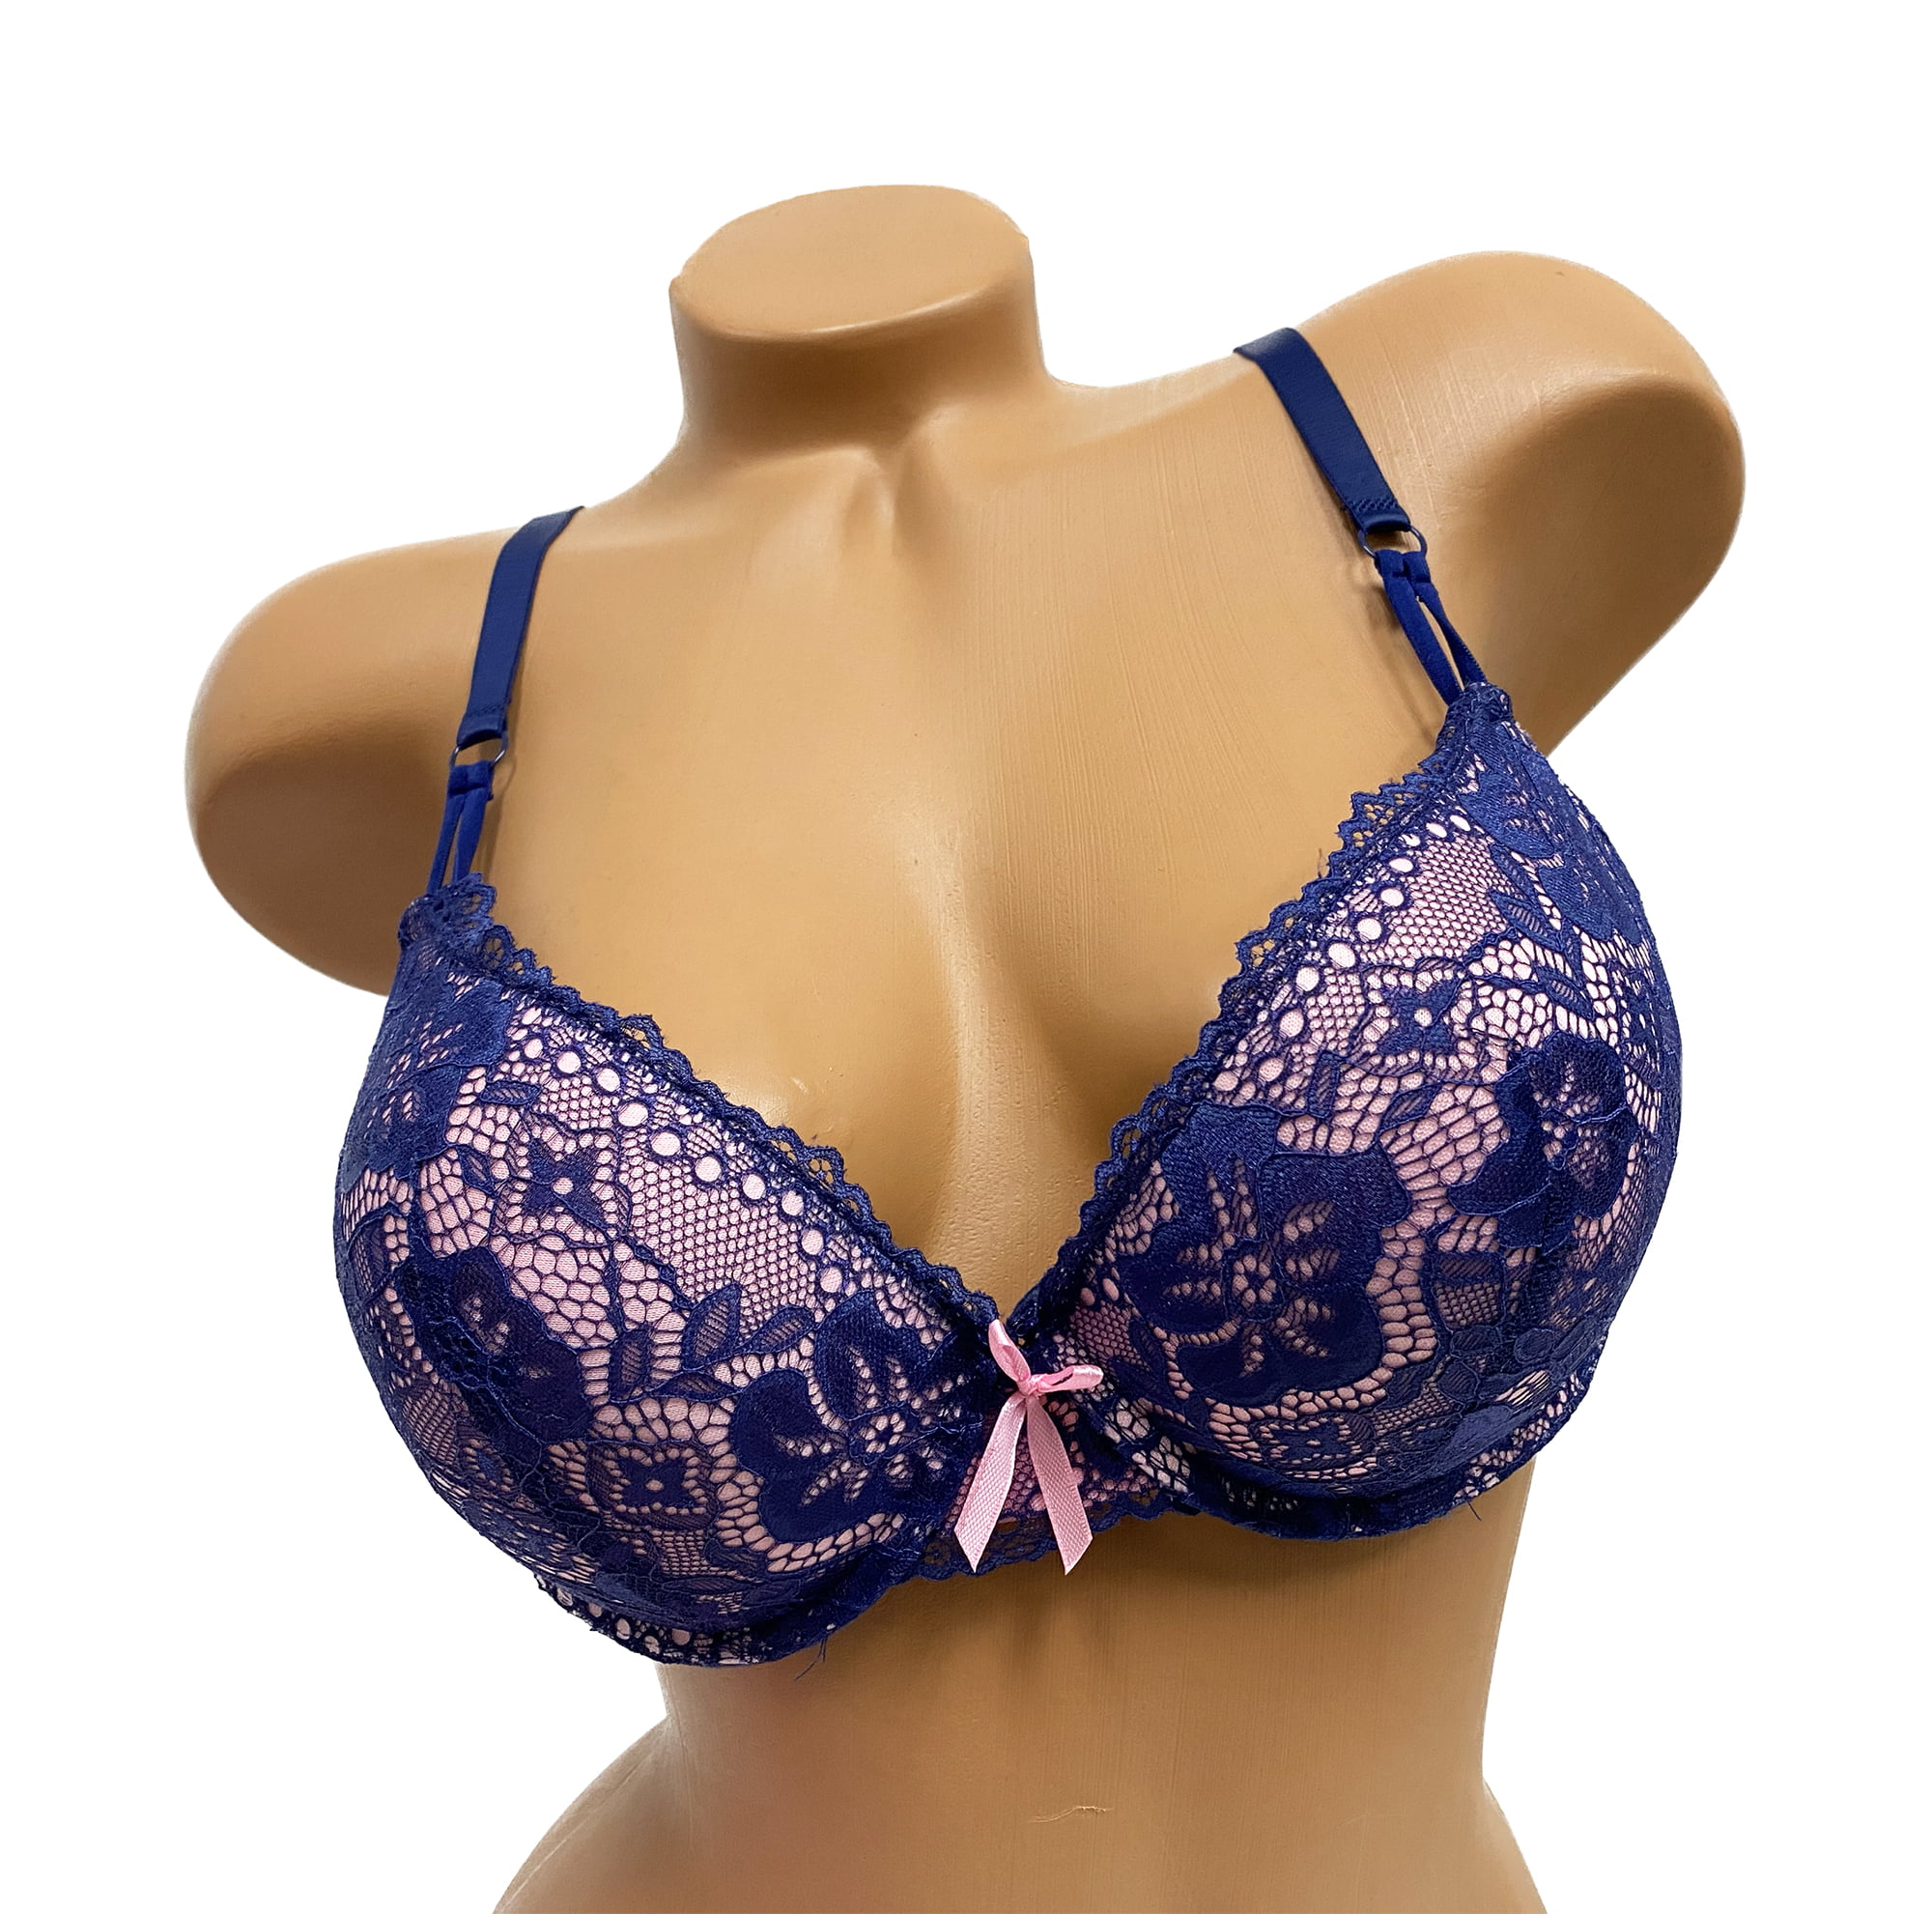 Women Bras 6 Pack of Double Pushup Lace Bra B cup C cup Size 34C (9901)